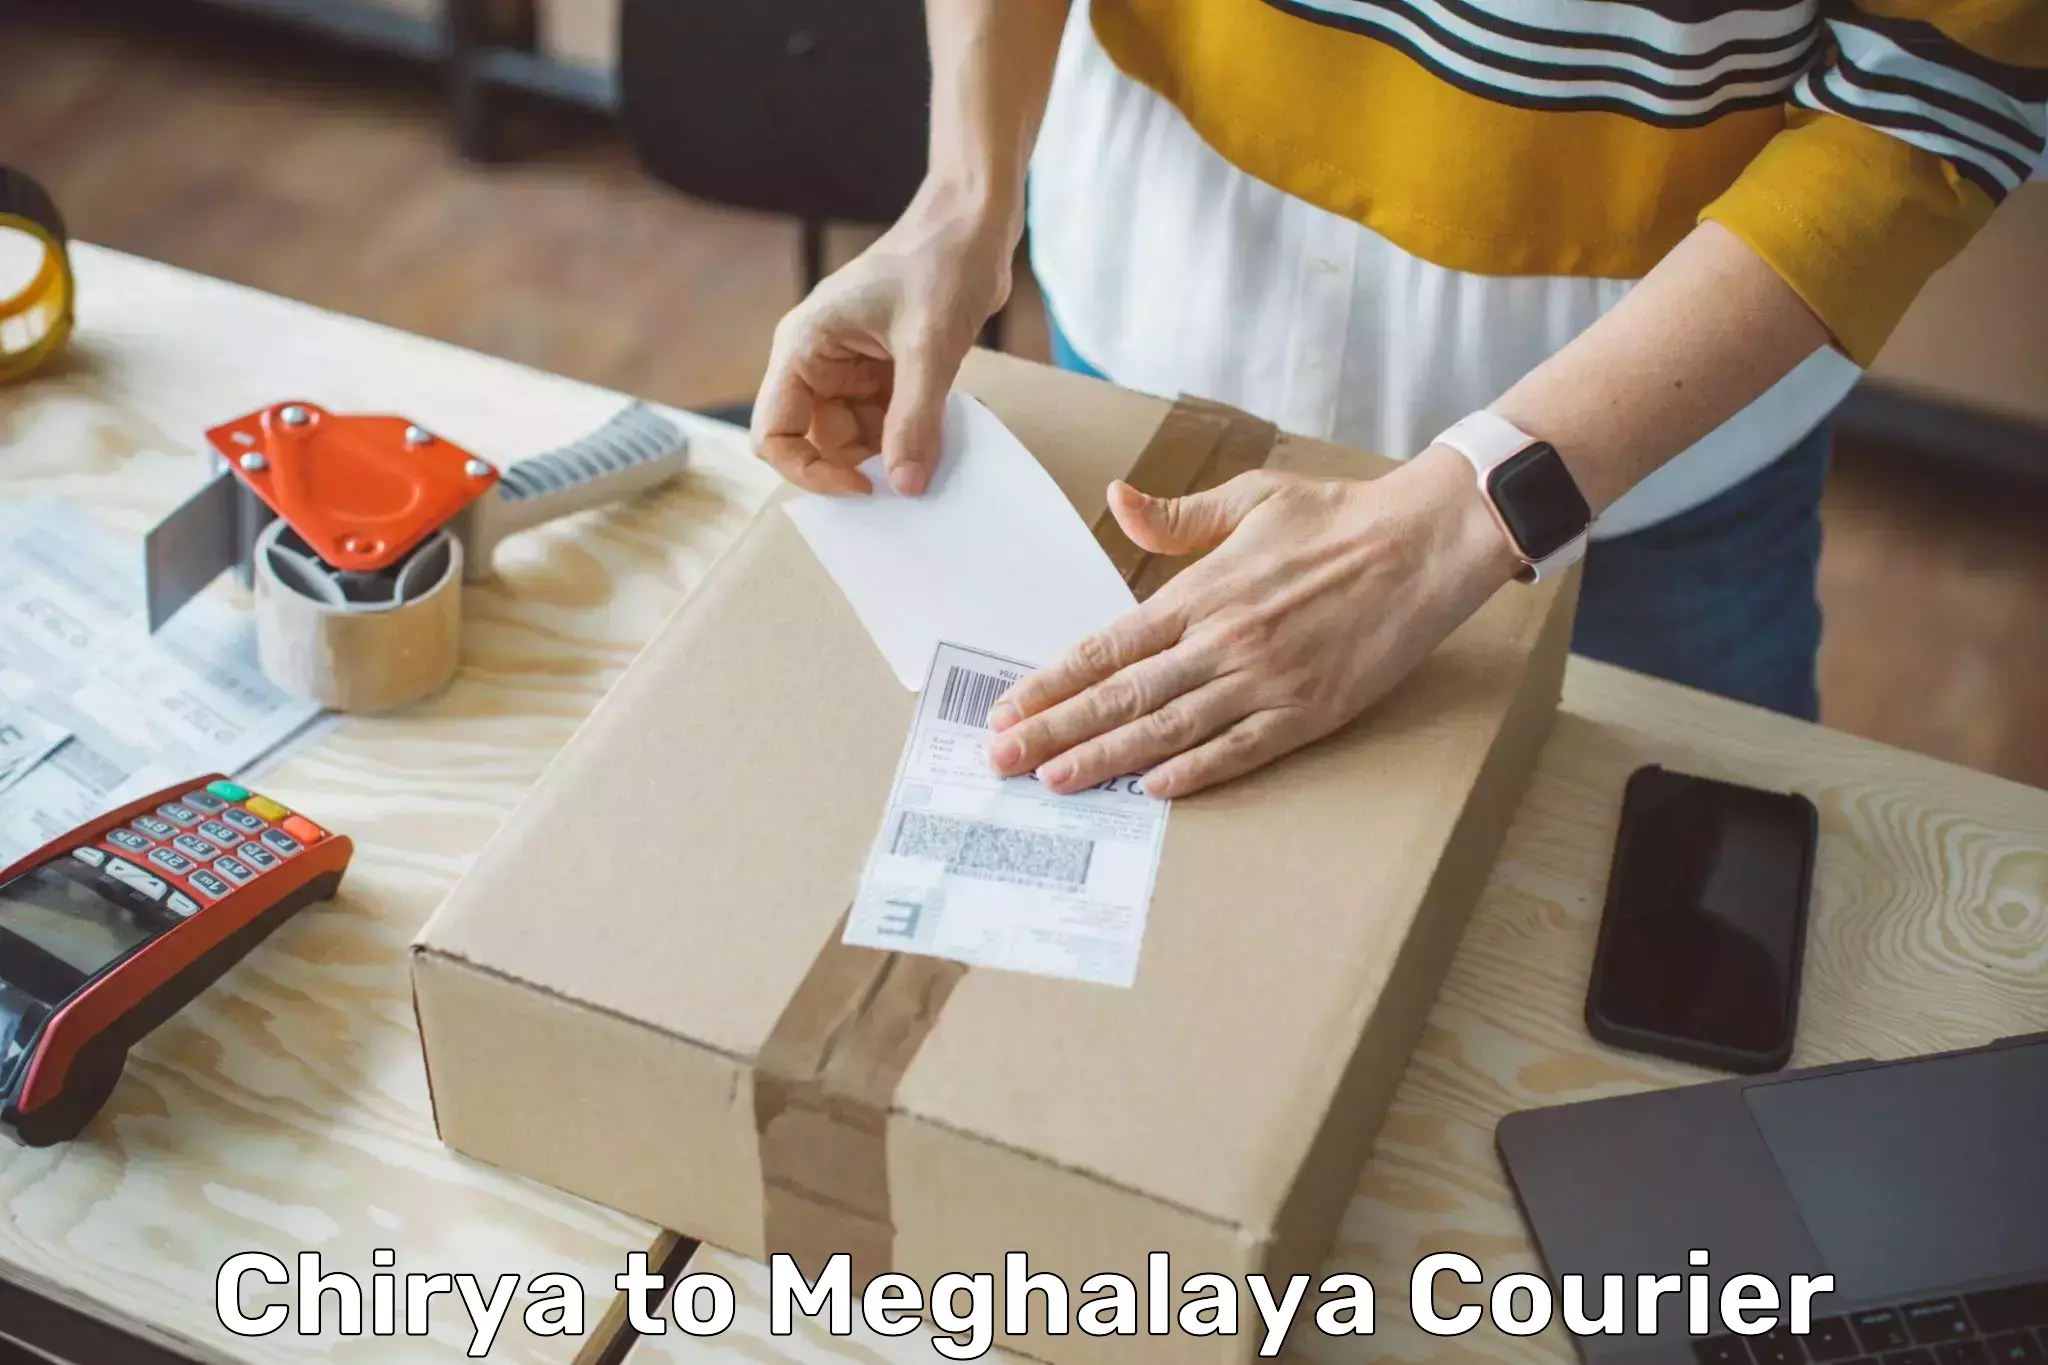 Courier service innovation Chirya to Shillong